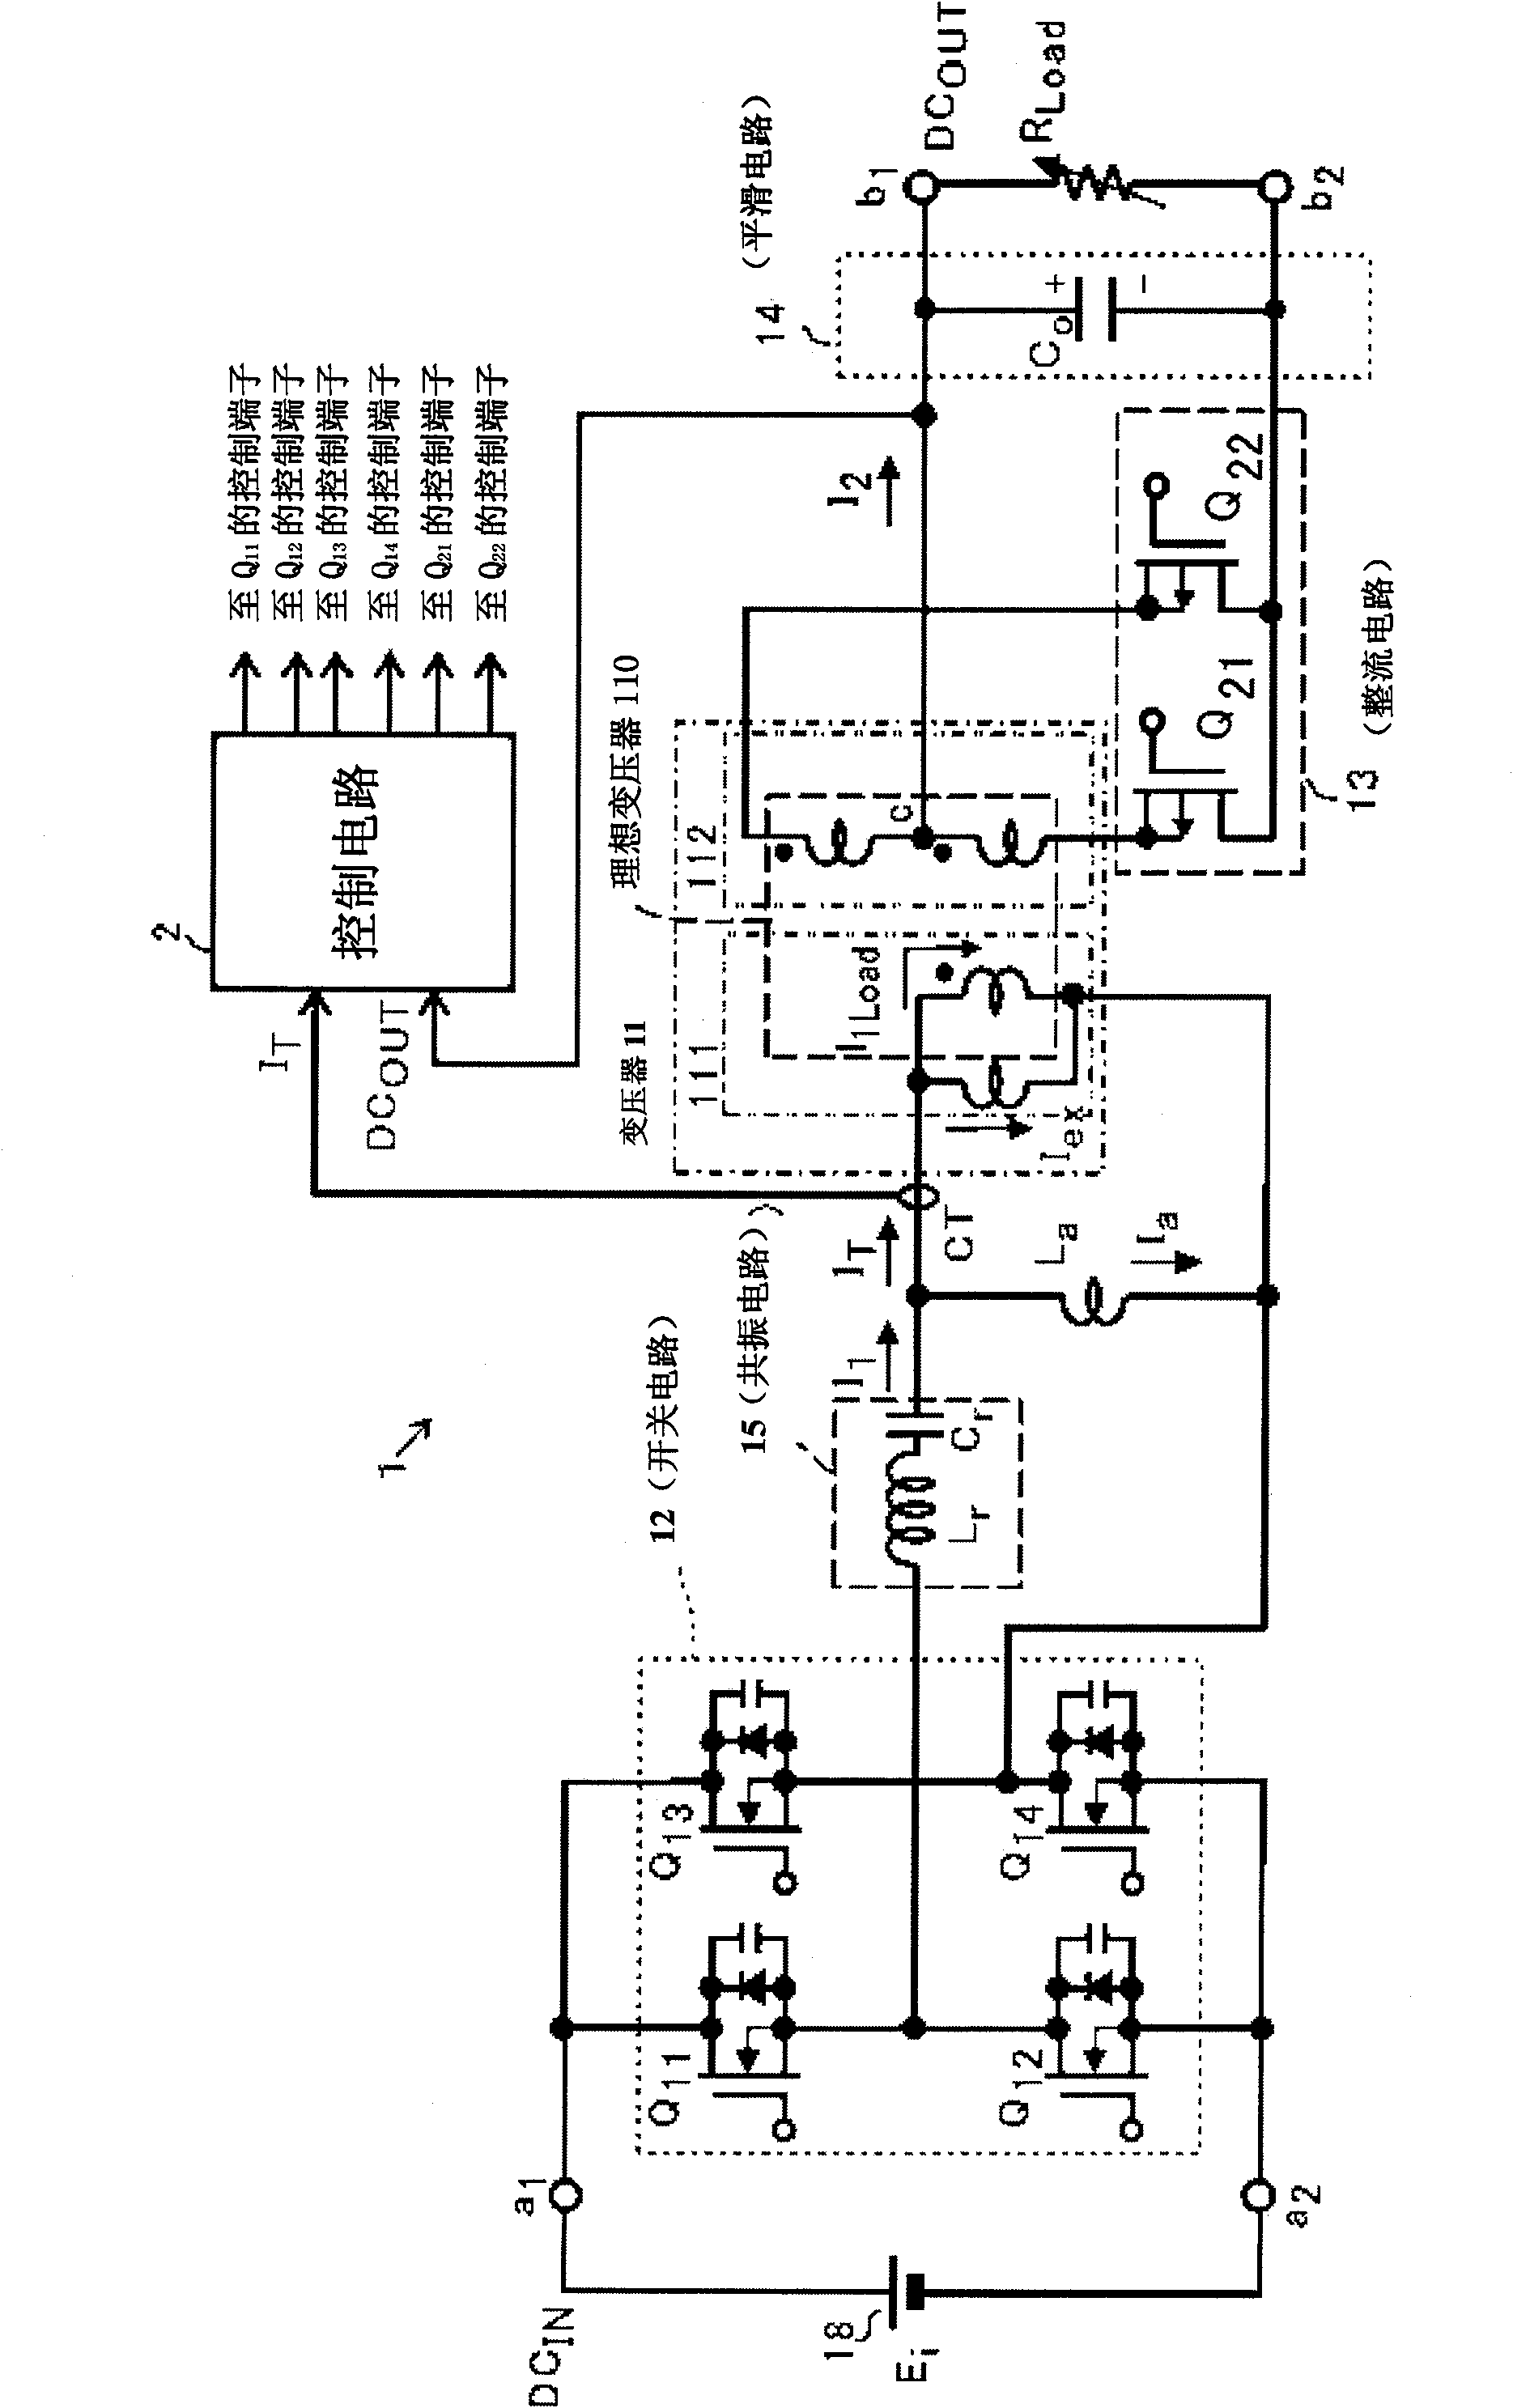 Current detecting circuit and transformer current measuring system